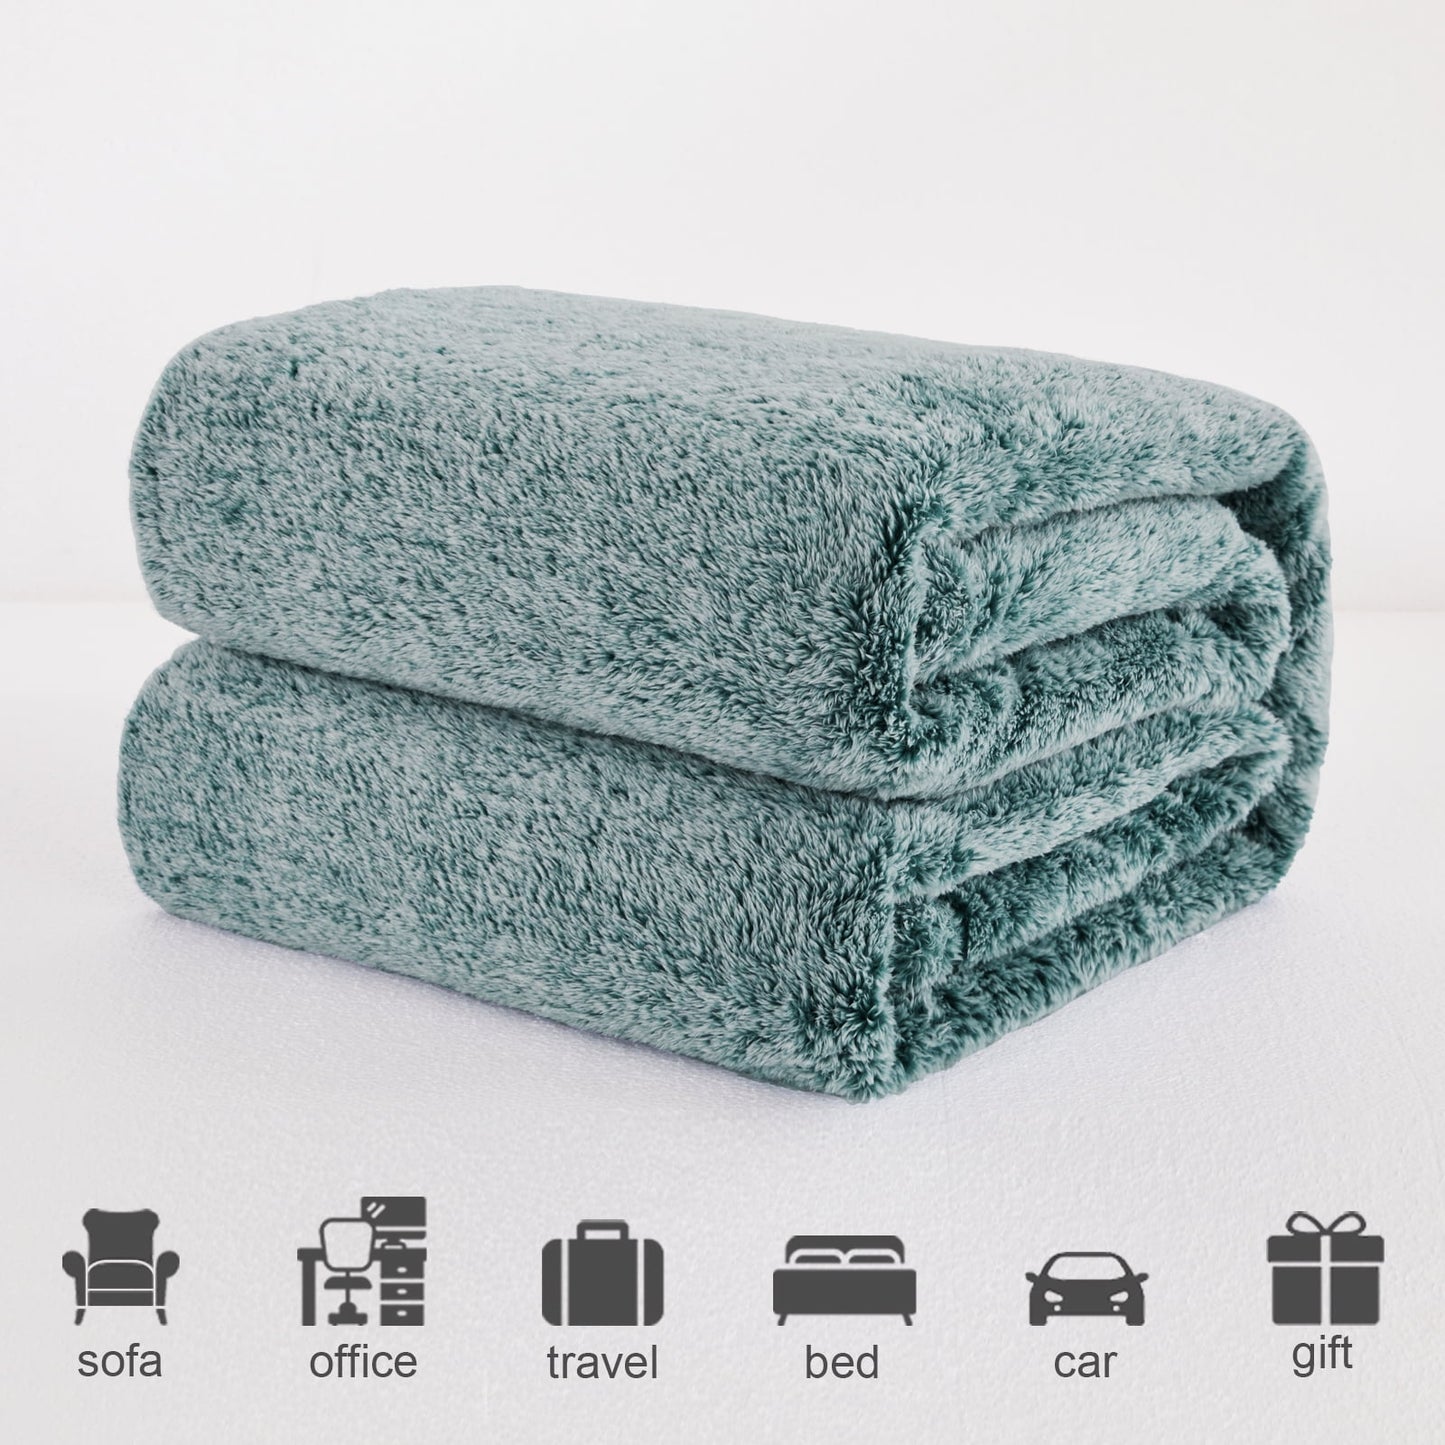 Exclusivo Mezcla Plush Fuzzy Fleece Queen Size Bed Blanket, Super Soft Fluffy and Thick Blankets for Travel Bed and Couch (Mixed Forest Green, 90x90 inches)